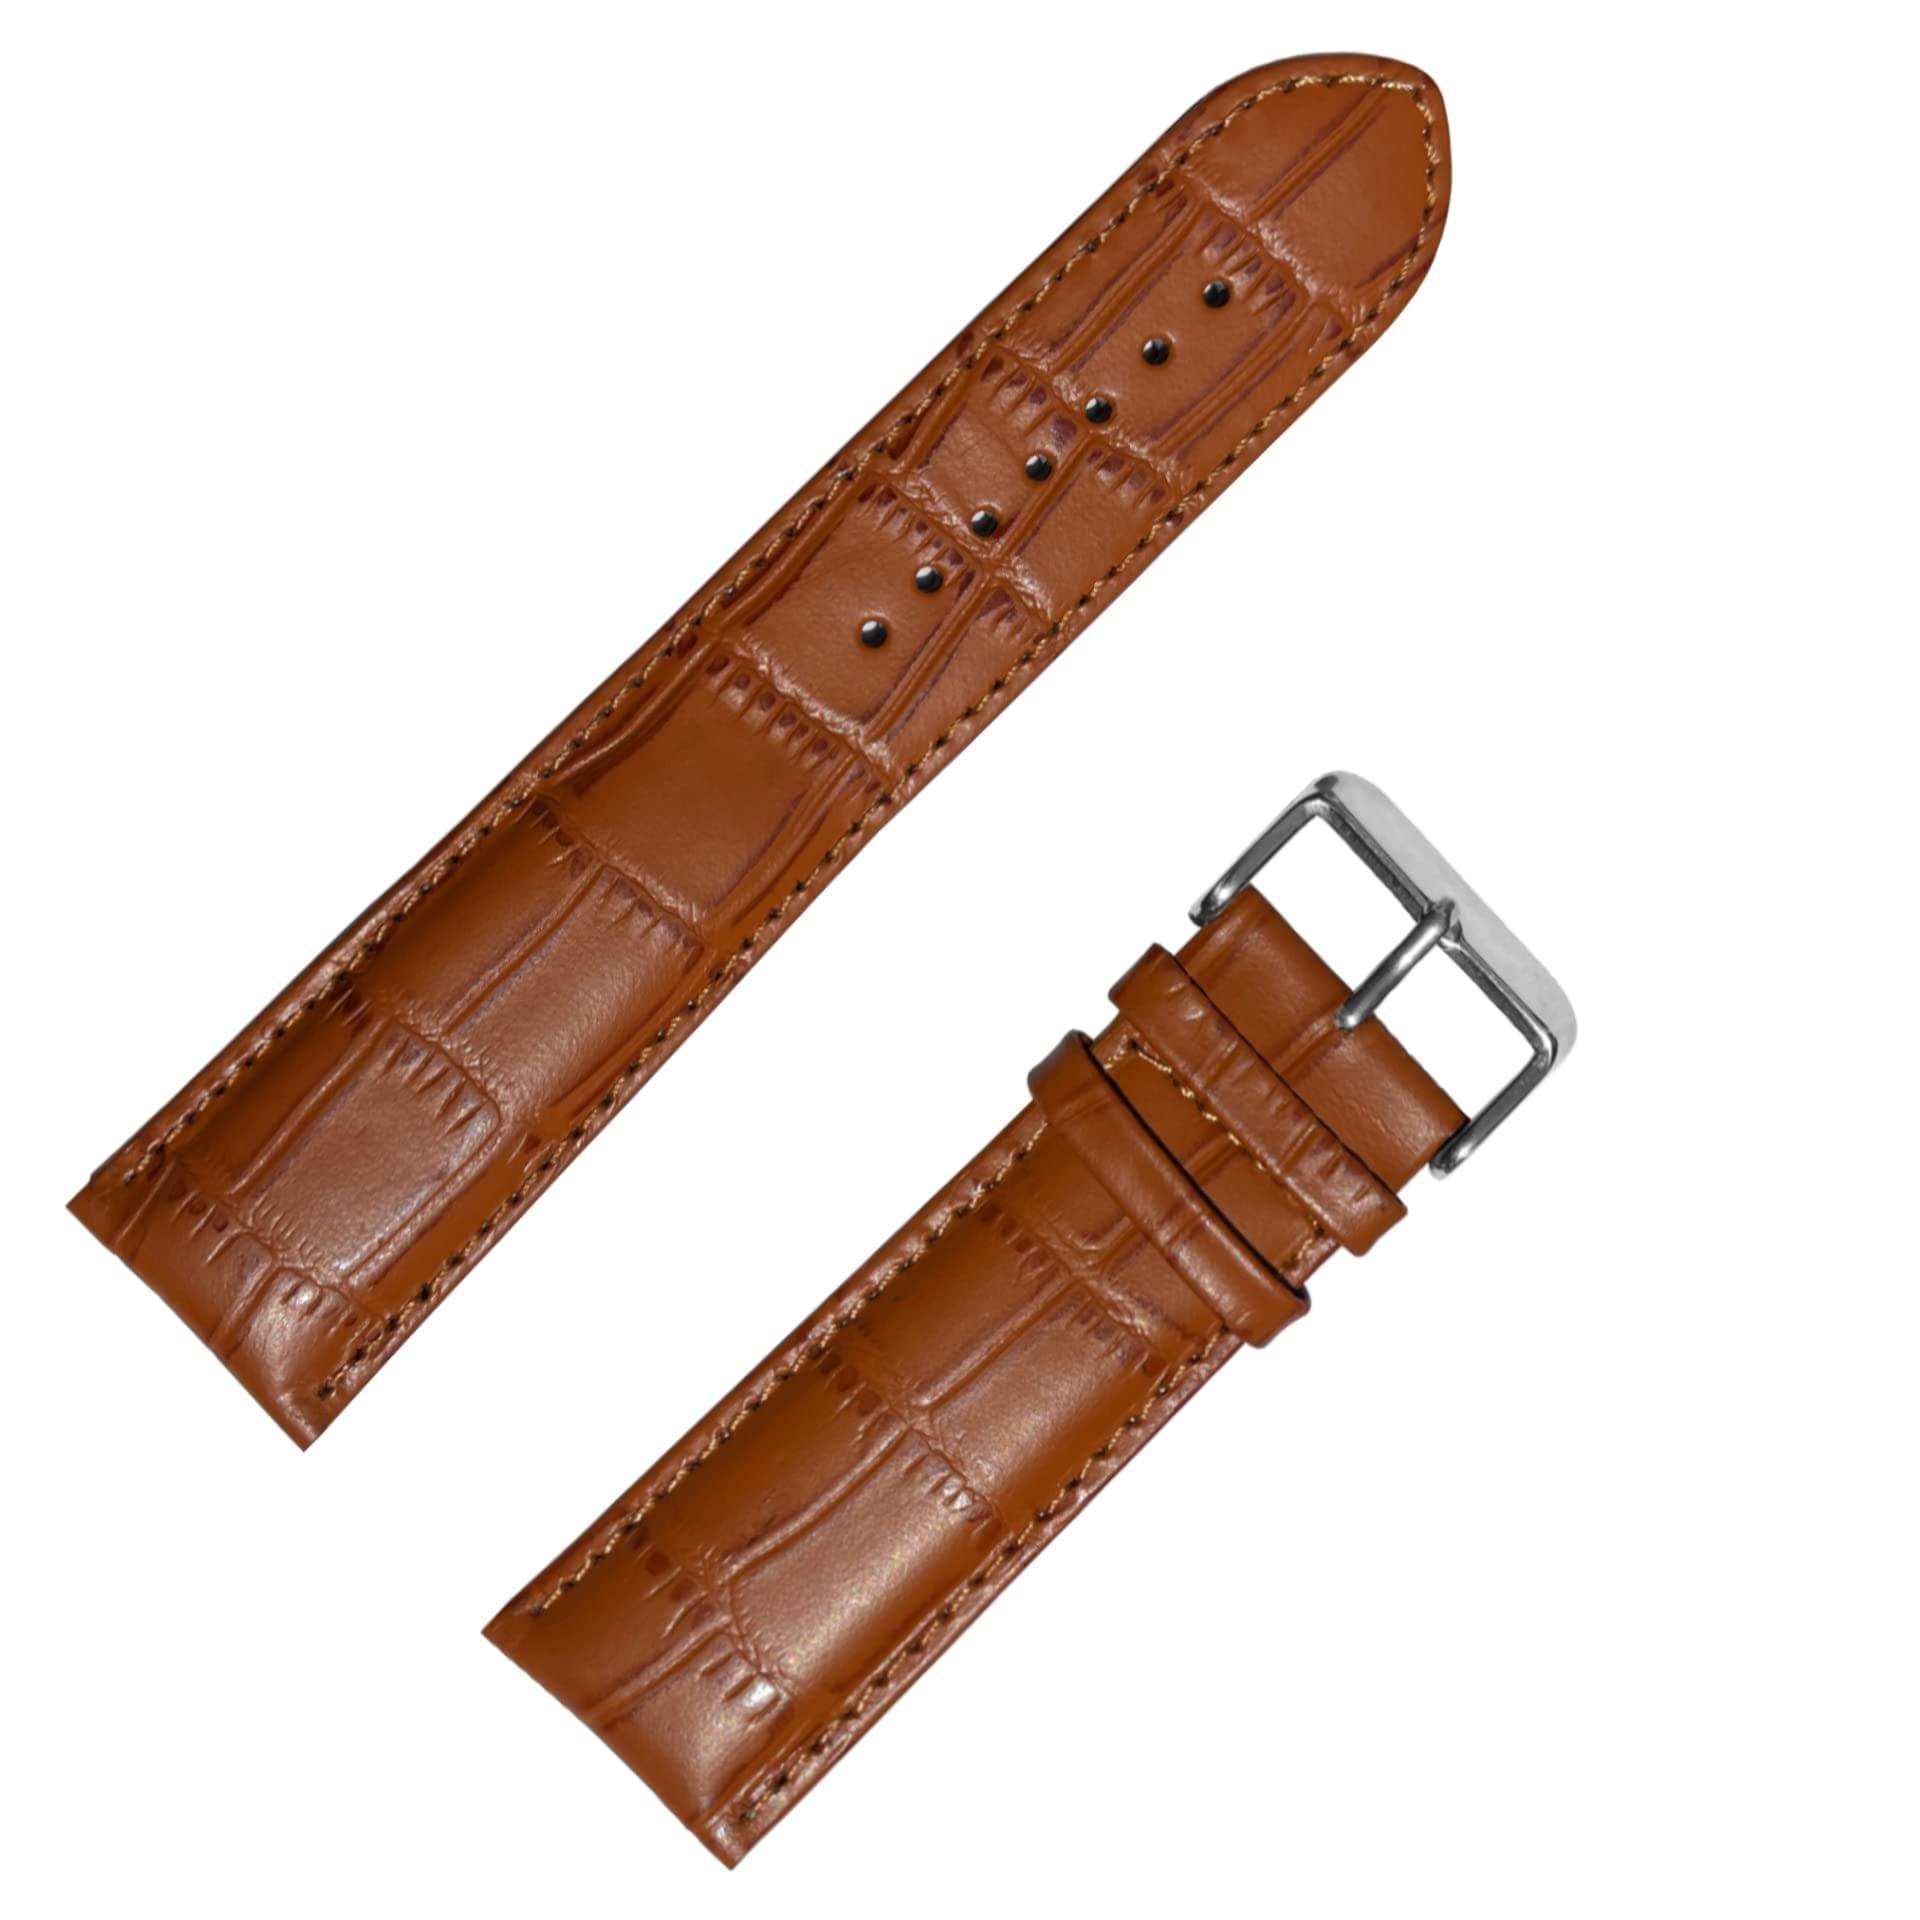 Tissot 1853 22mm Rounded Lugs Brown Leather Strap products price ₹1,799.00  - Men Fashion at Giftwatches store in Feezital.com